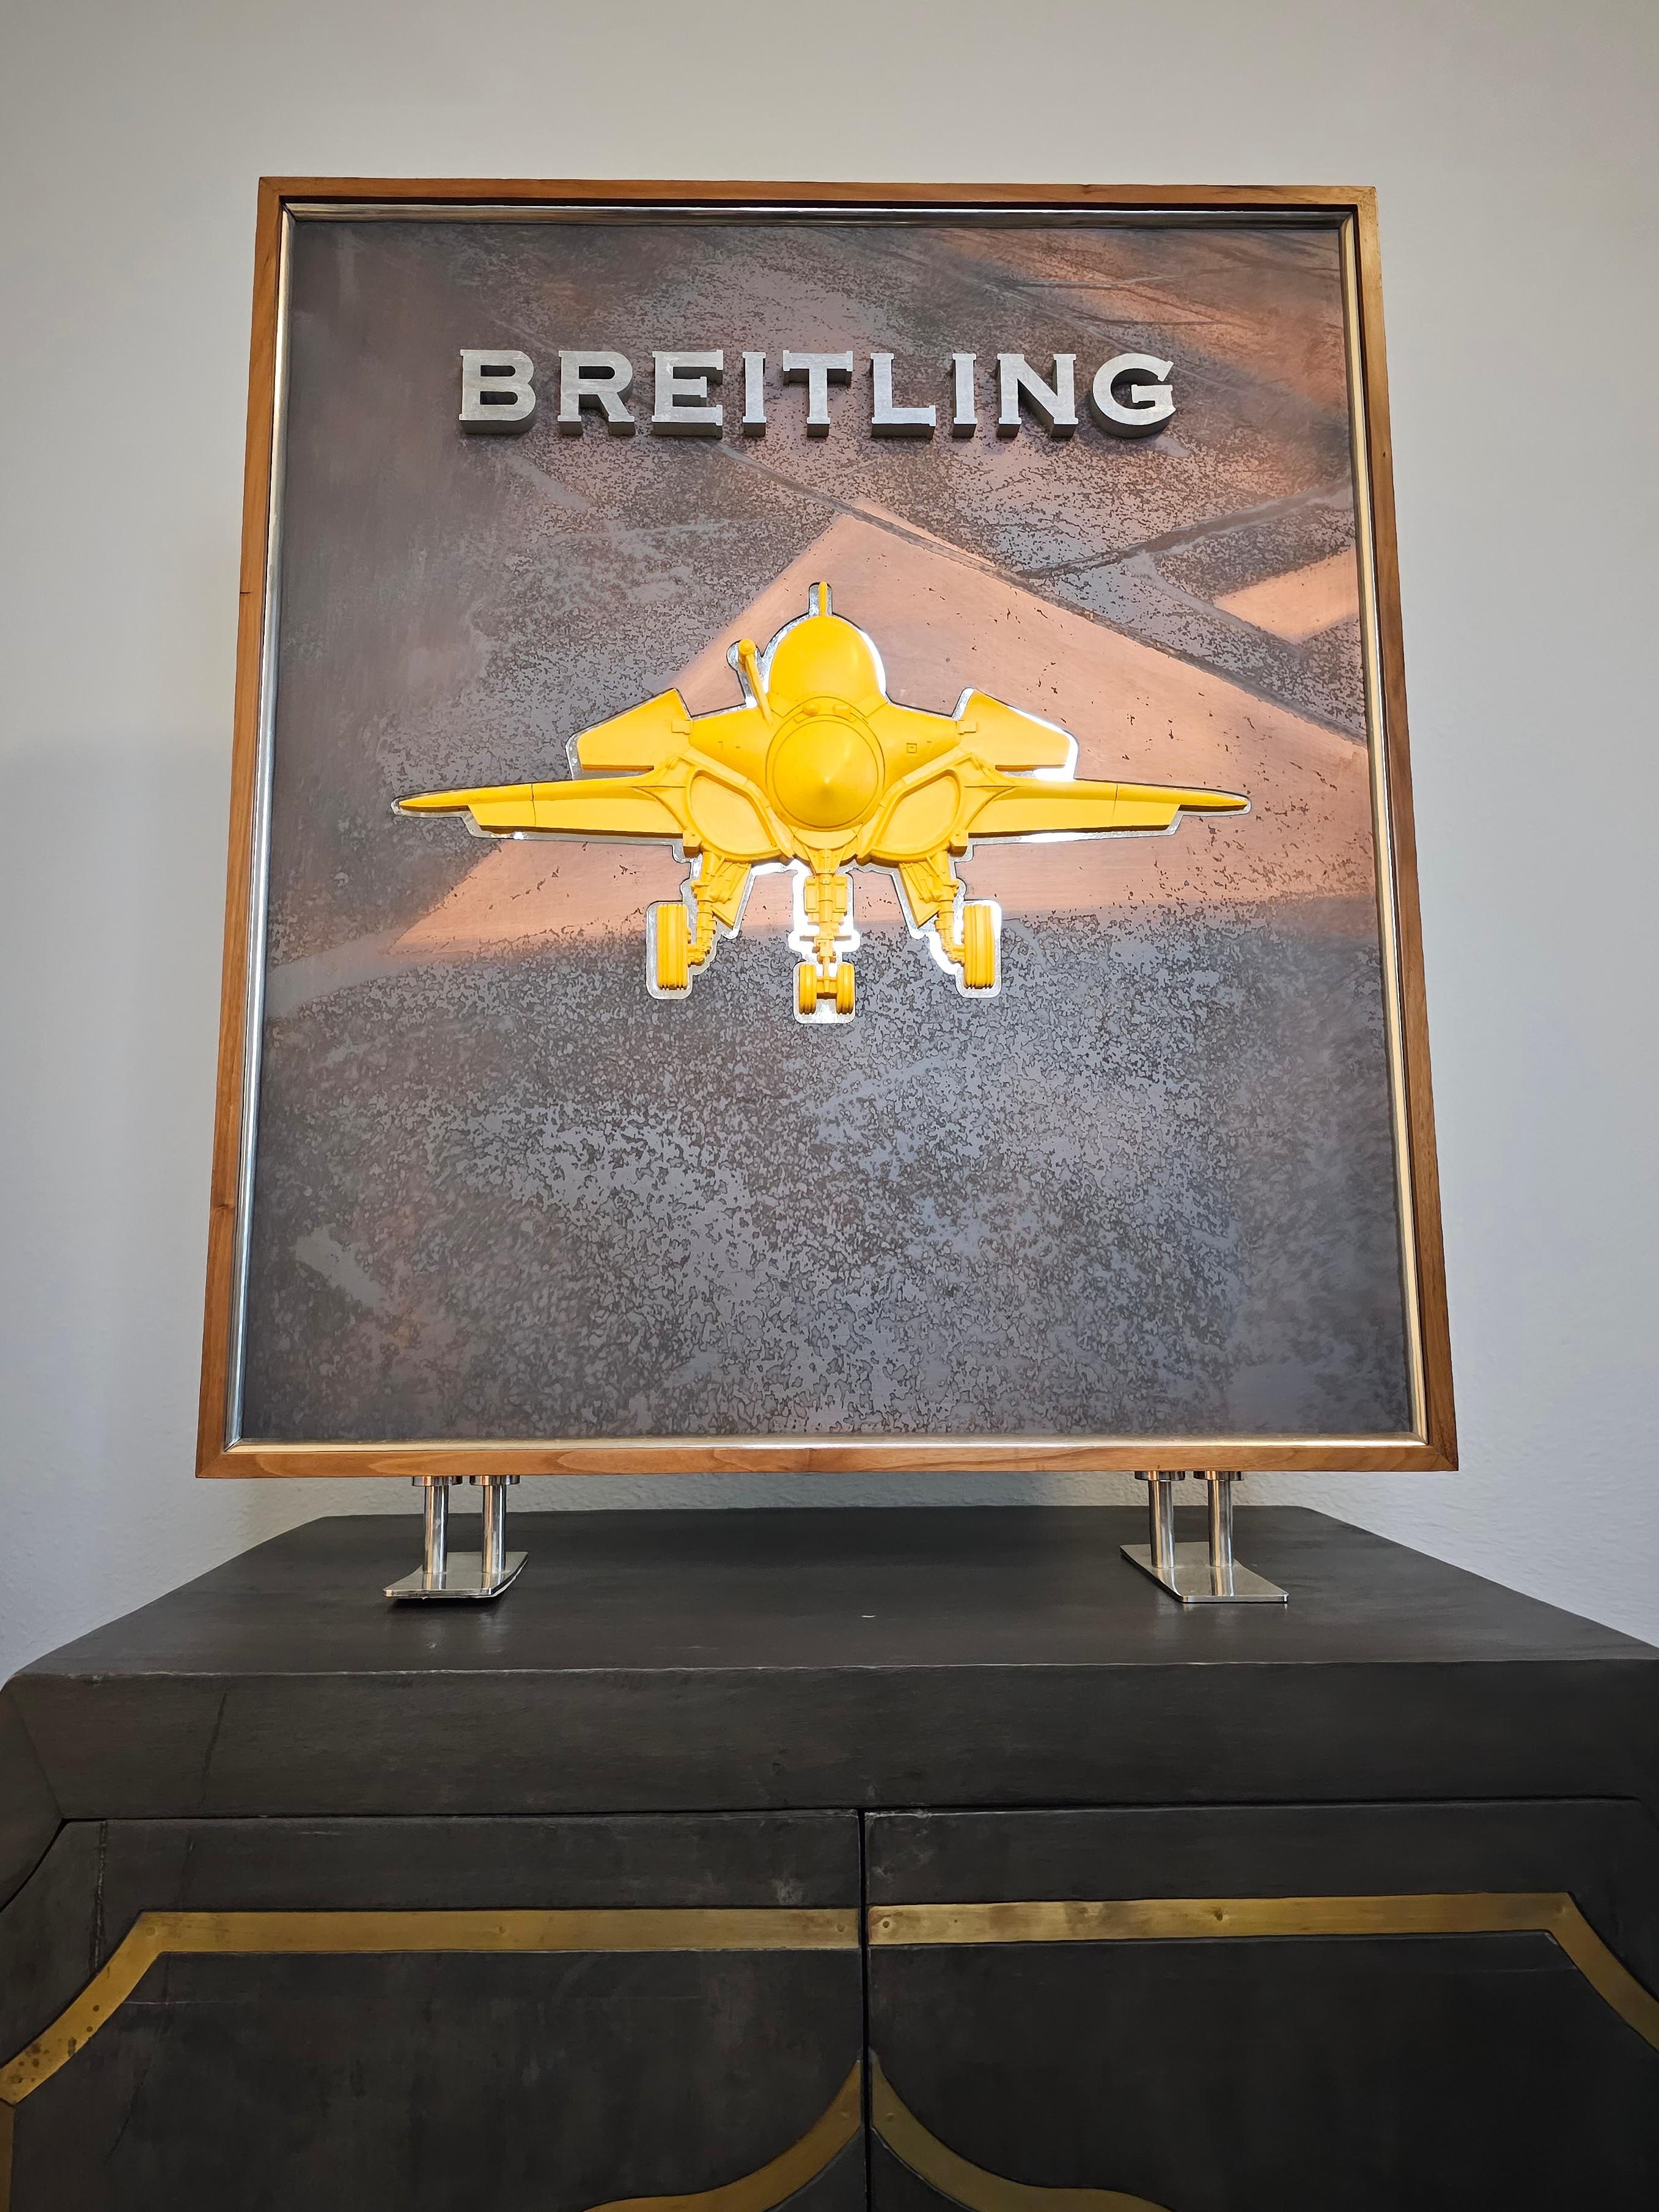 Breitling Retail Store Display Advertising Sign  For Sale 11